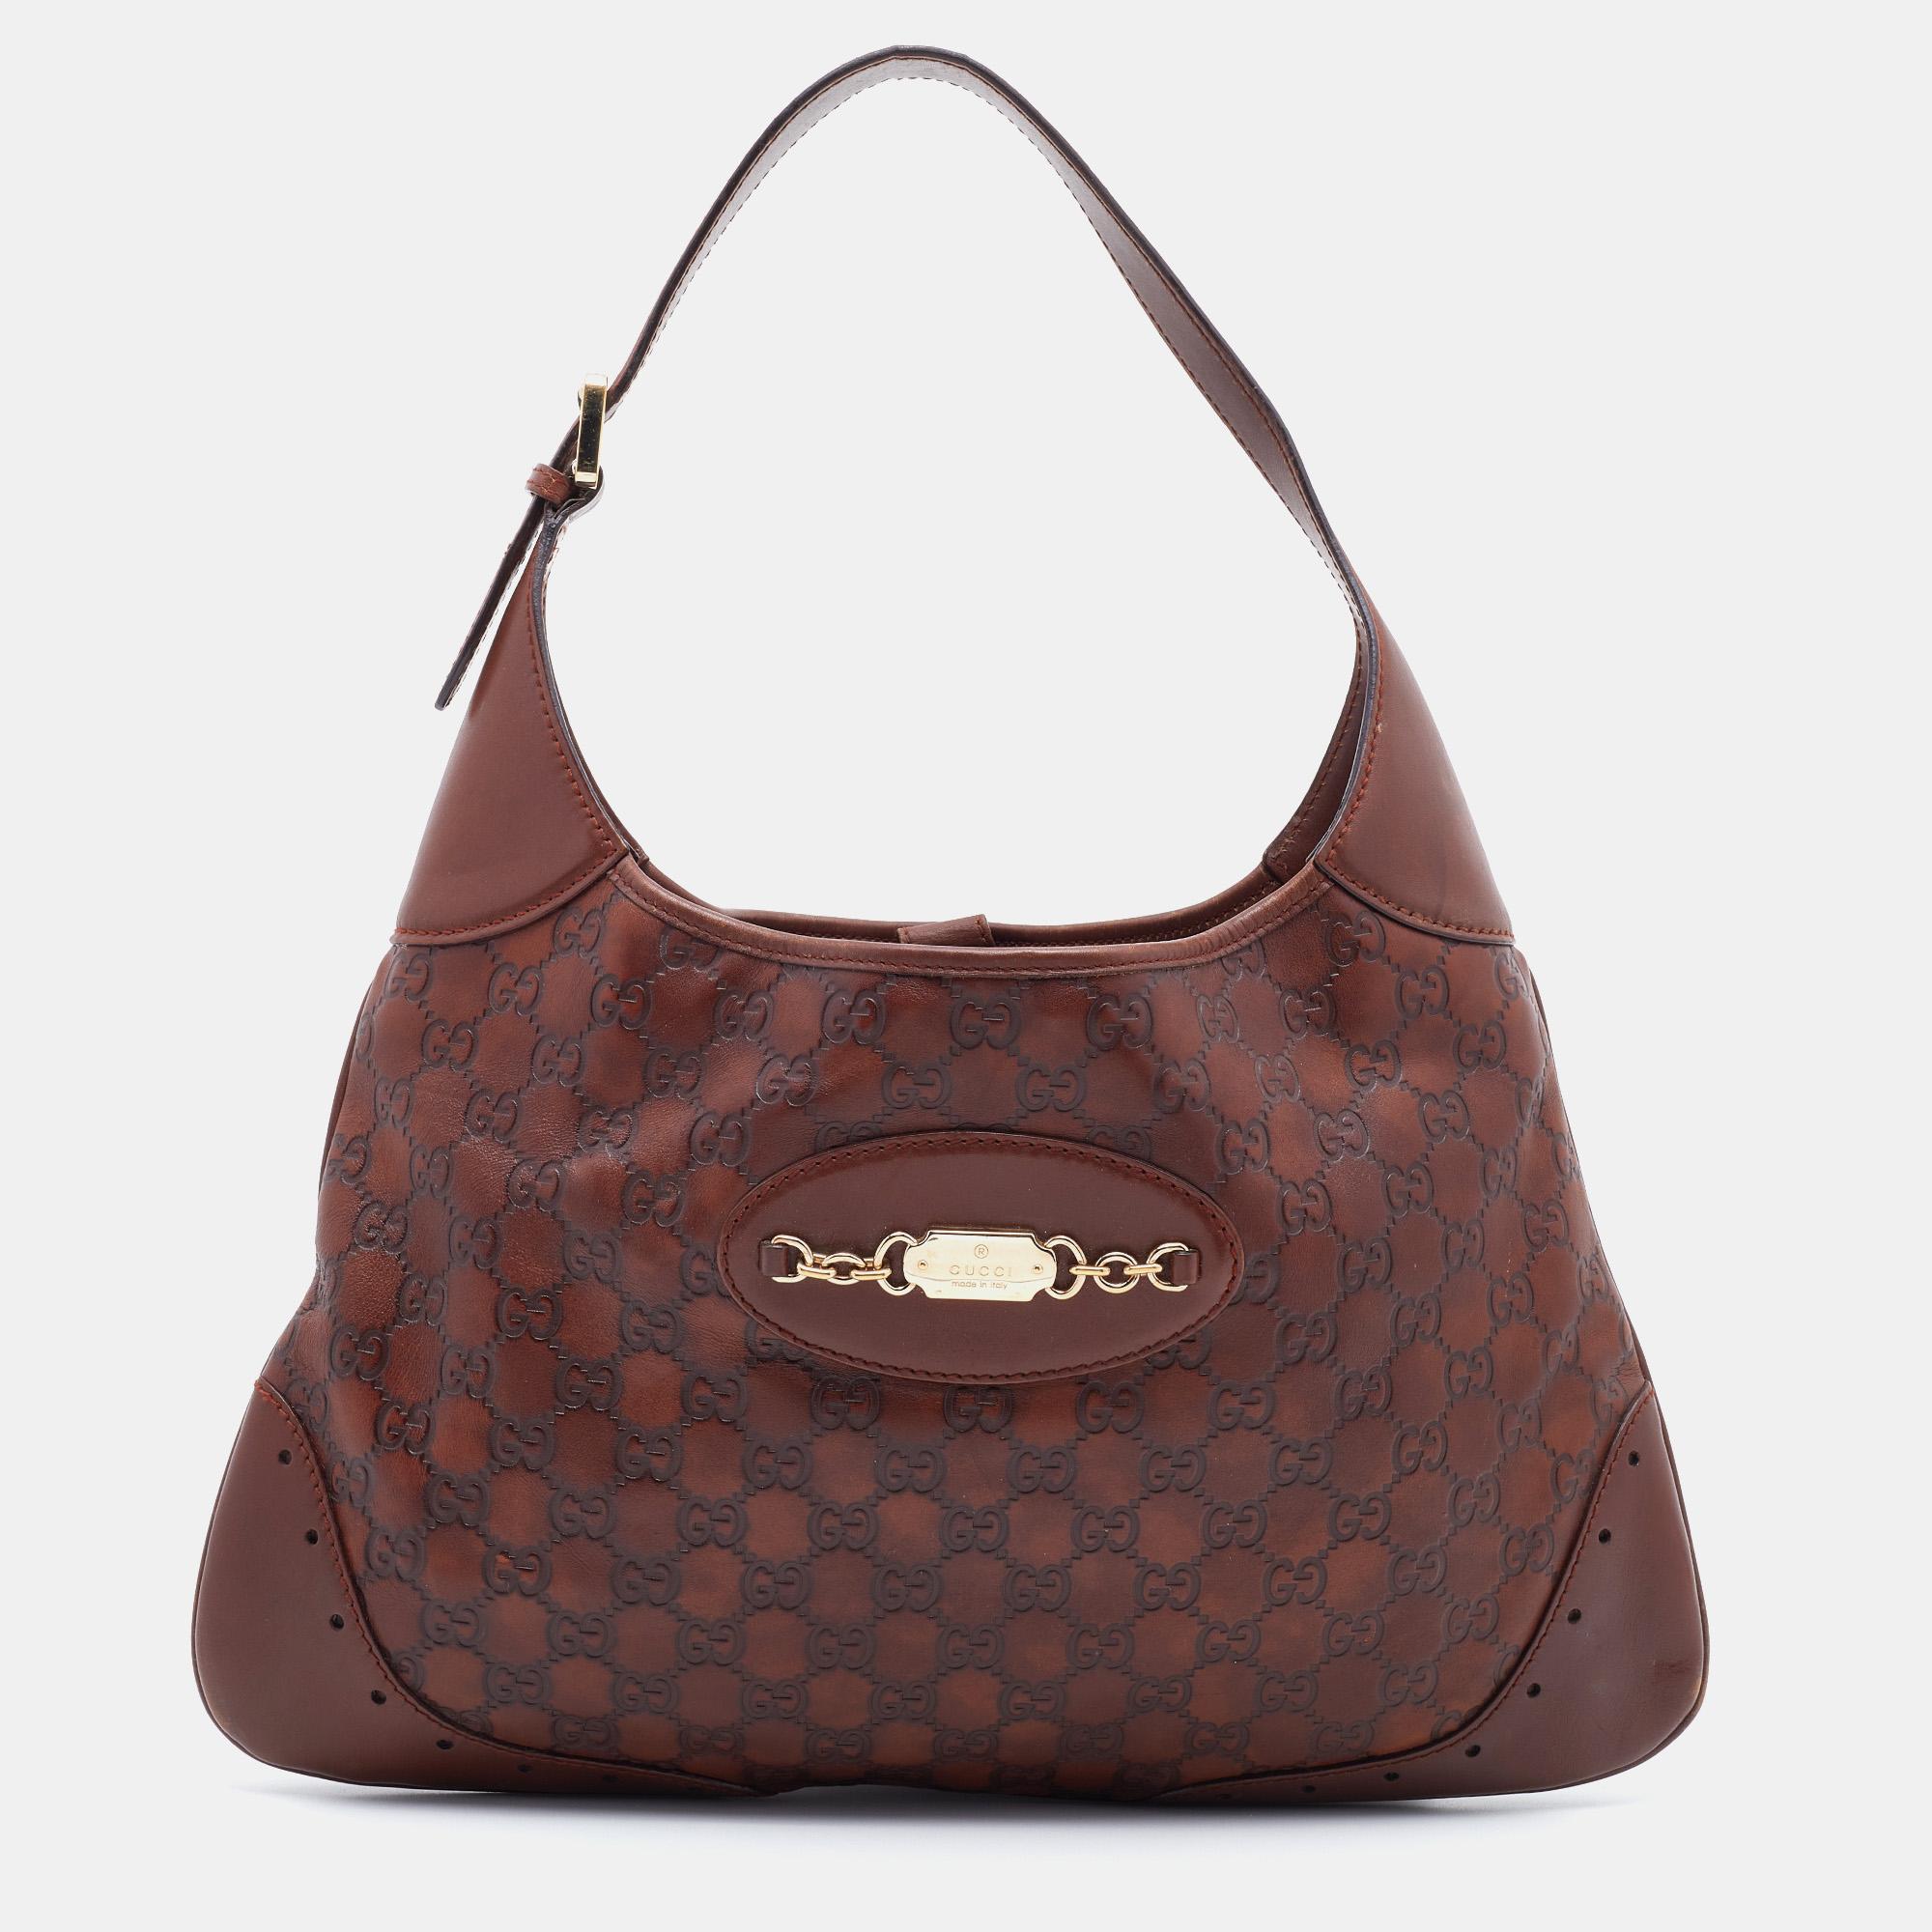 Simple details, high quality, and everyday convenience mark this Punch hobo by Gucci. The bag is made of Guccissima leather, and it features a single handle, gold-tone metal accents, and a spacious interior.